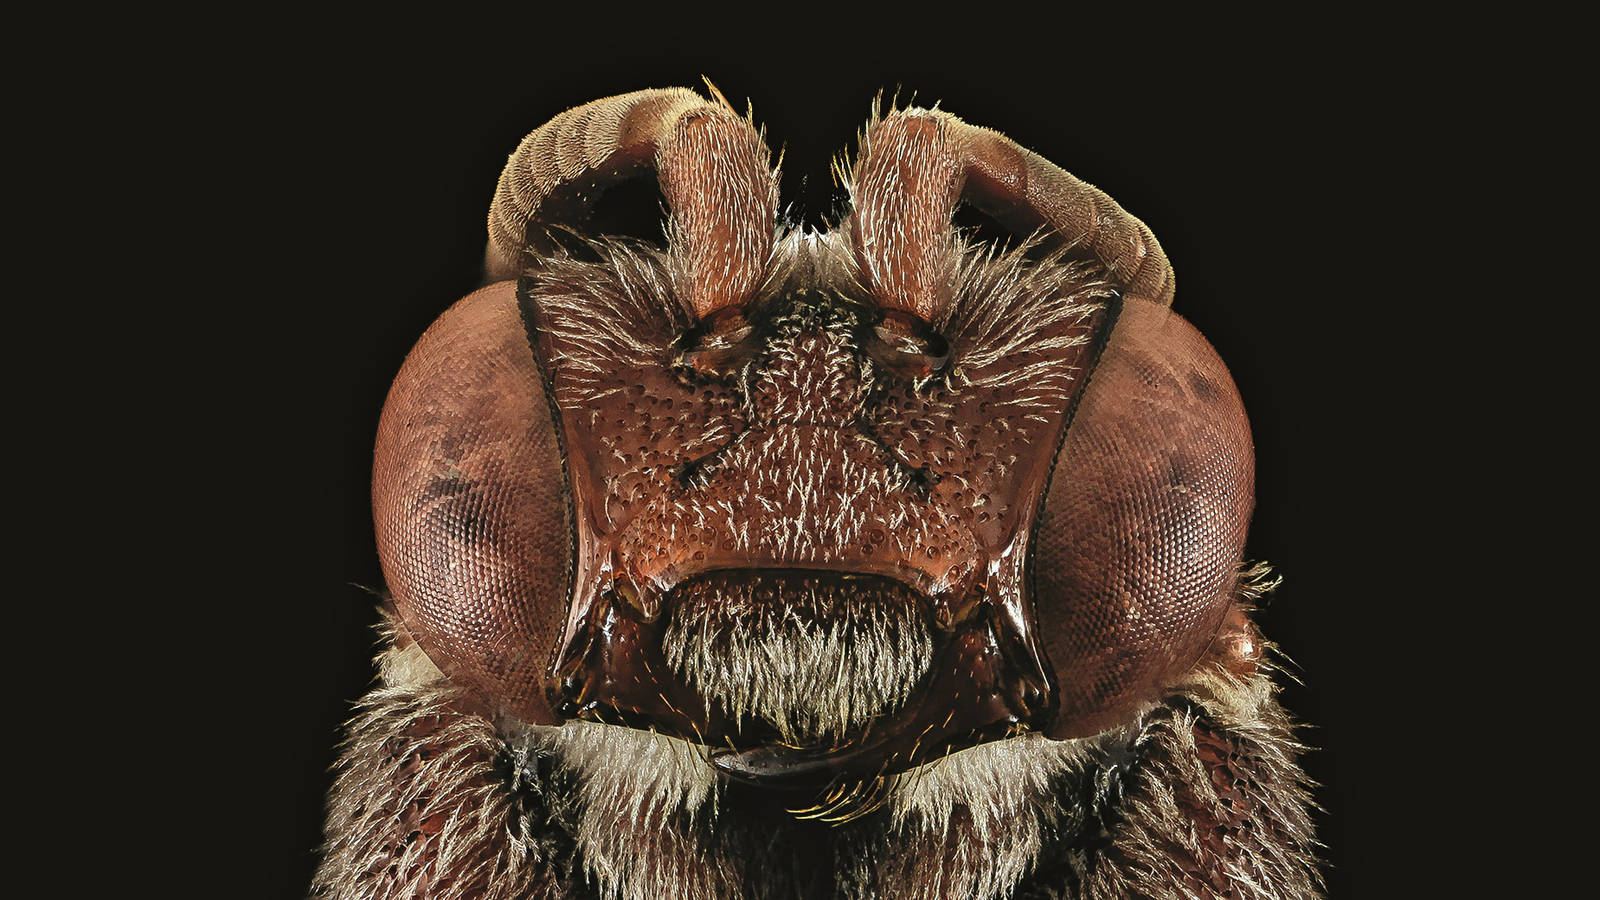 <h3 style="text-align: center; padding: 50px;"><span class="text-Intro-style"><em>Nomada australis</em> (bee), Gateway National Recreation Area, New York. © BROOKE ALEXANDER/USGS BEE INVENTORY AND MONITORING LAB</span></h3>